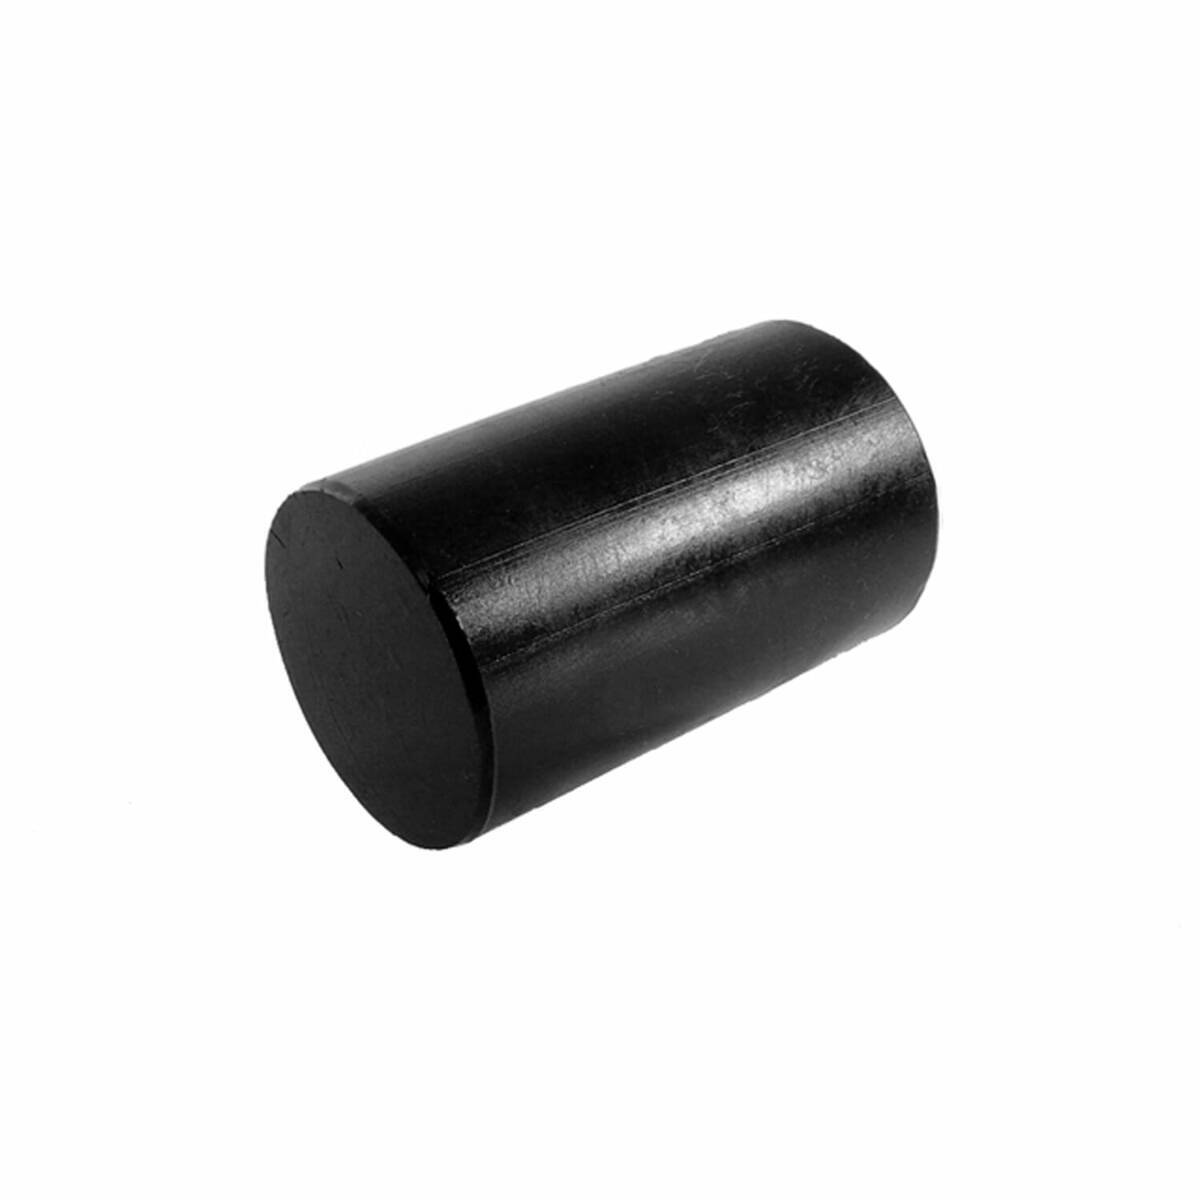 Solid Rubber Cylinder for Universal Applications 1 Piece EDMP Rubber